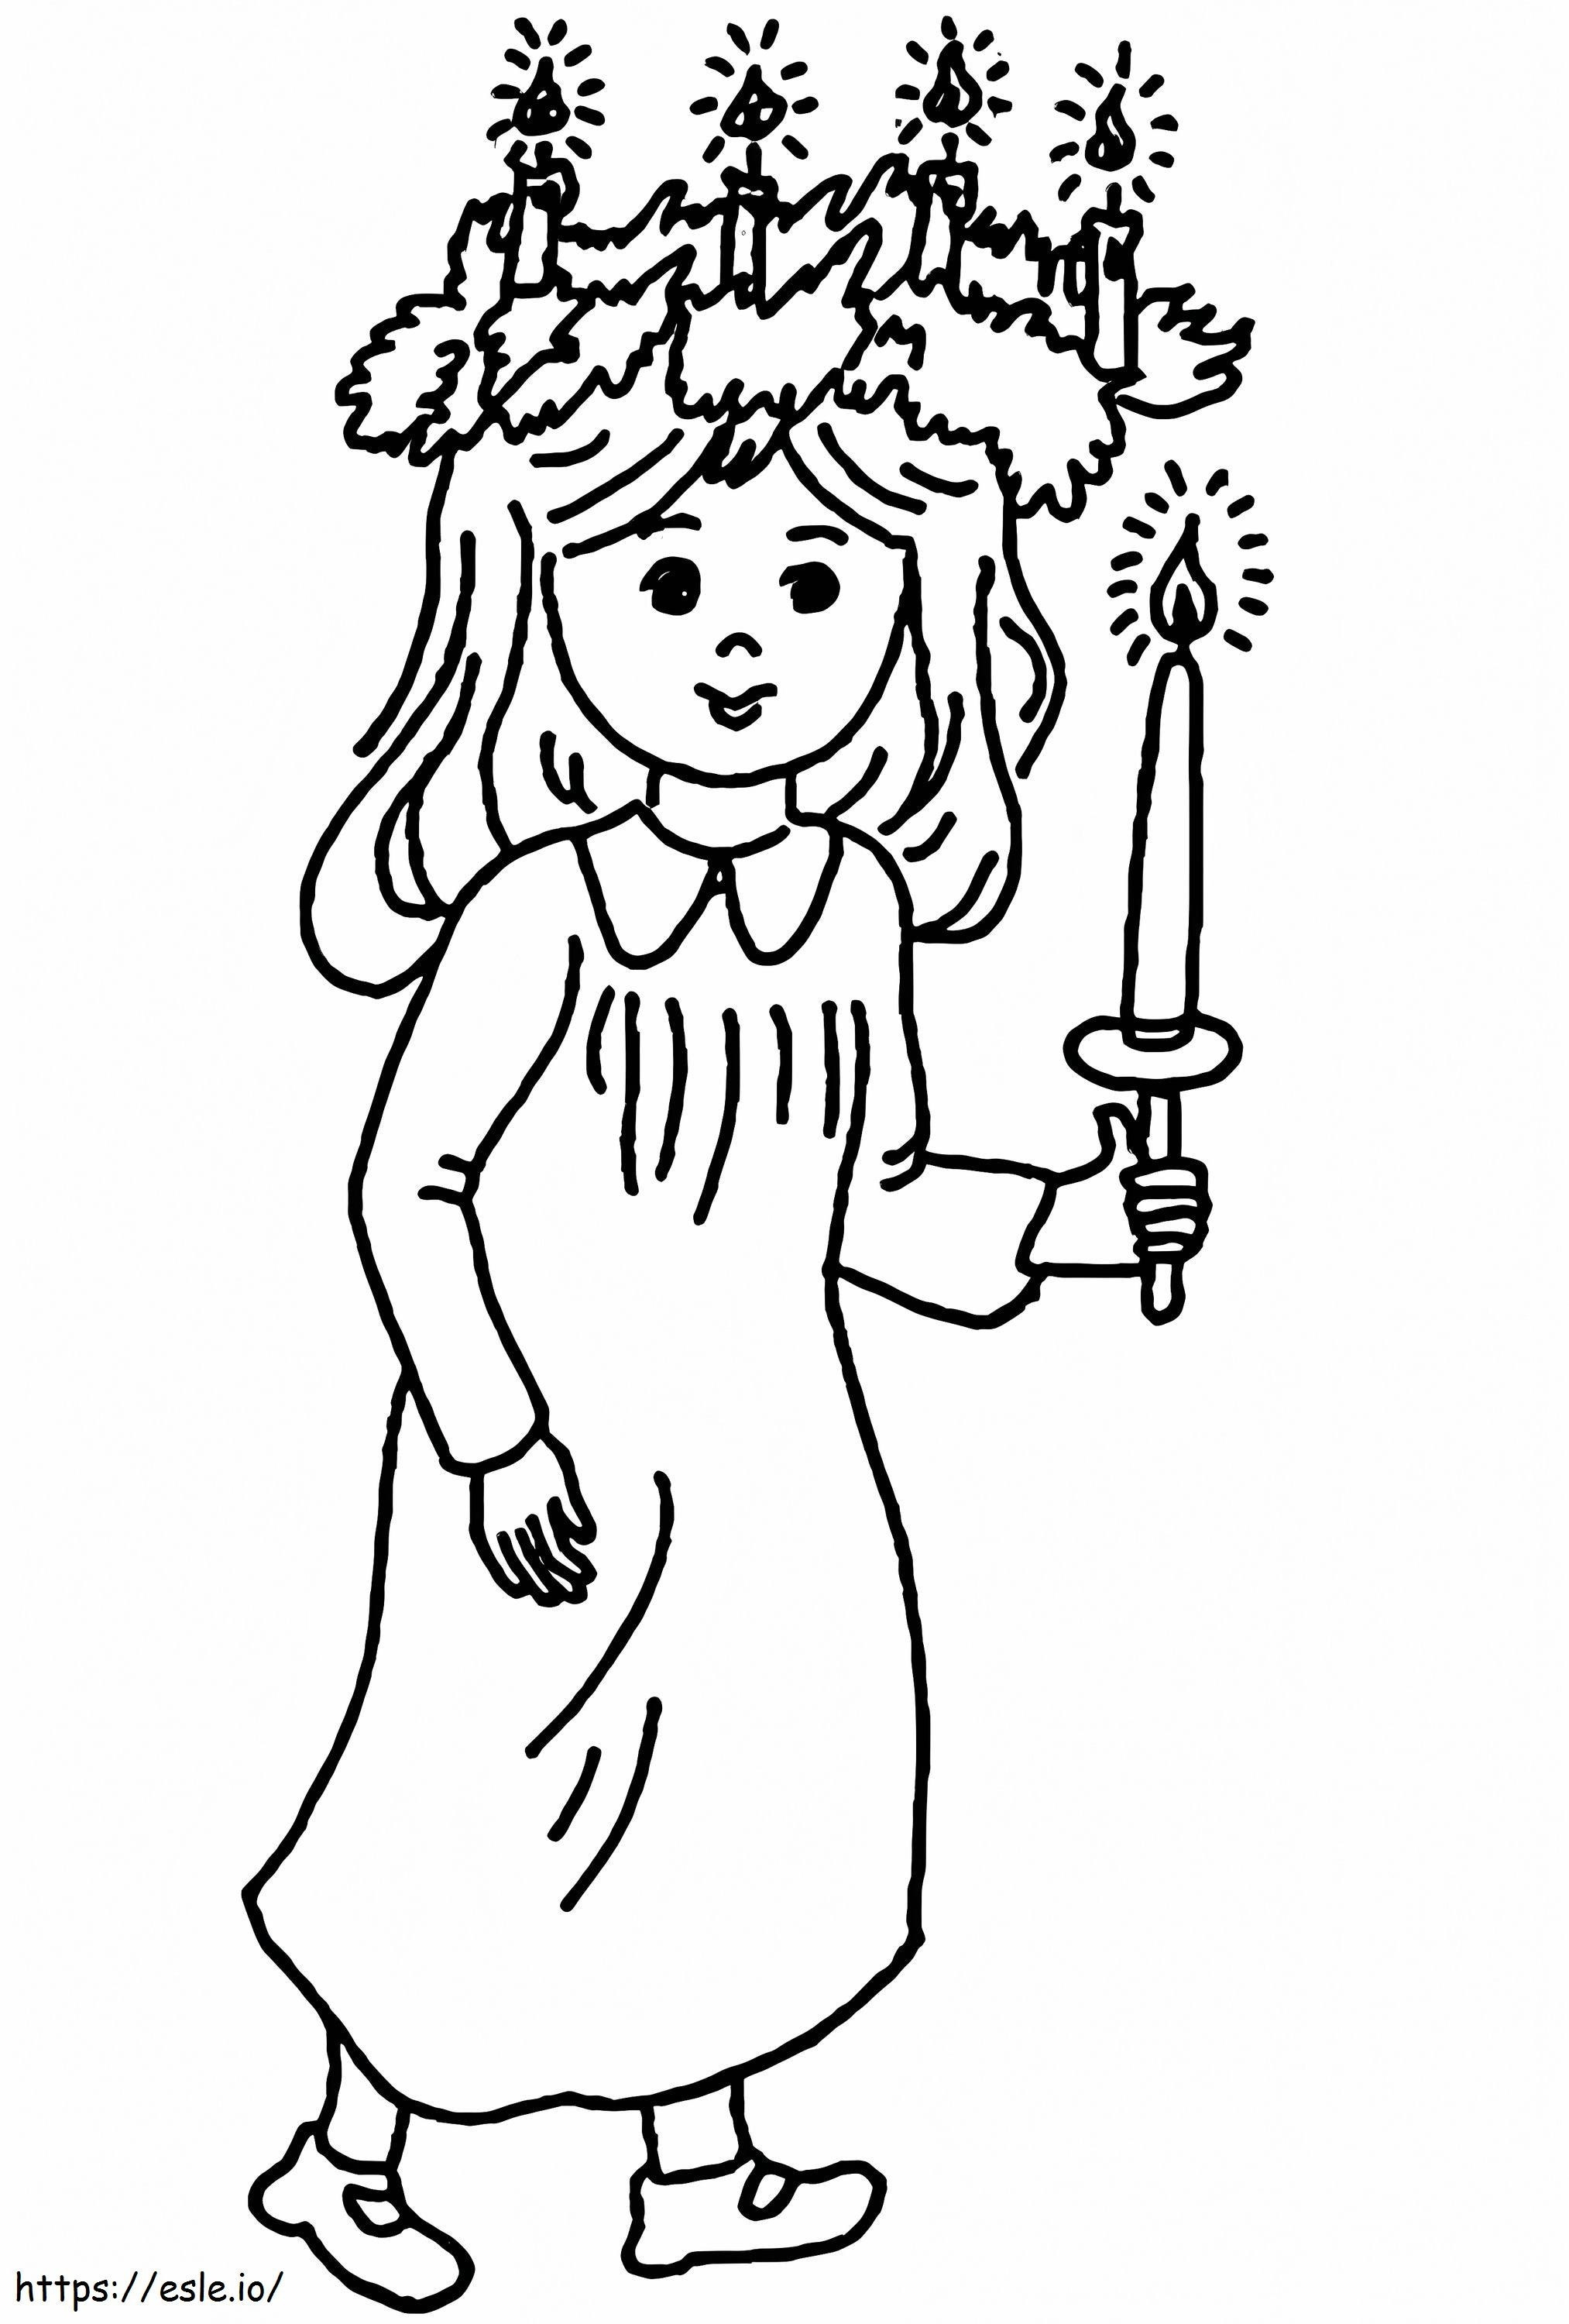 Little Saint Lucy coloring page